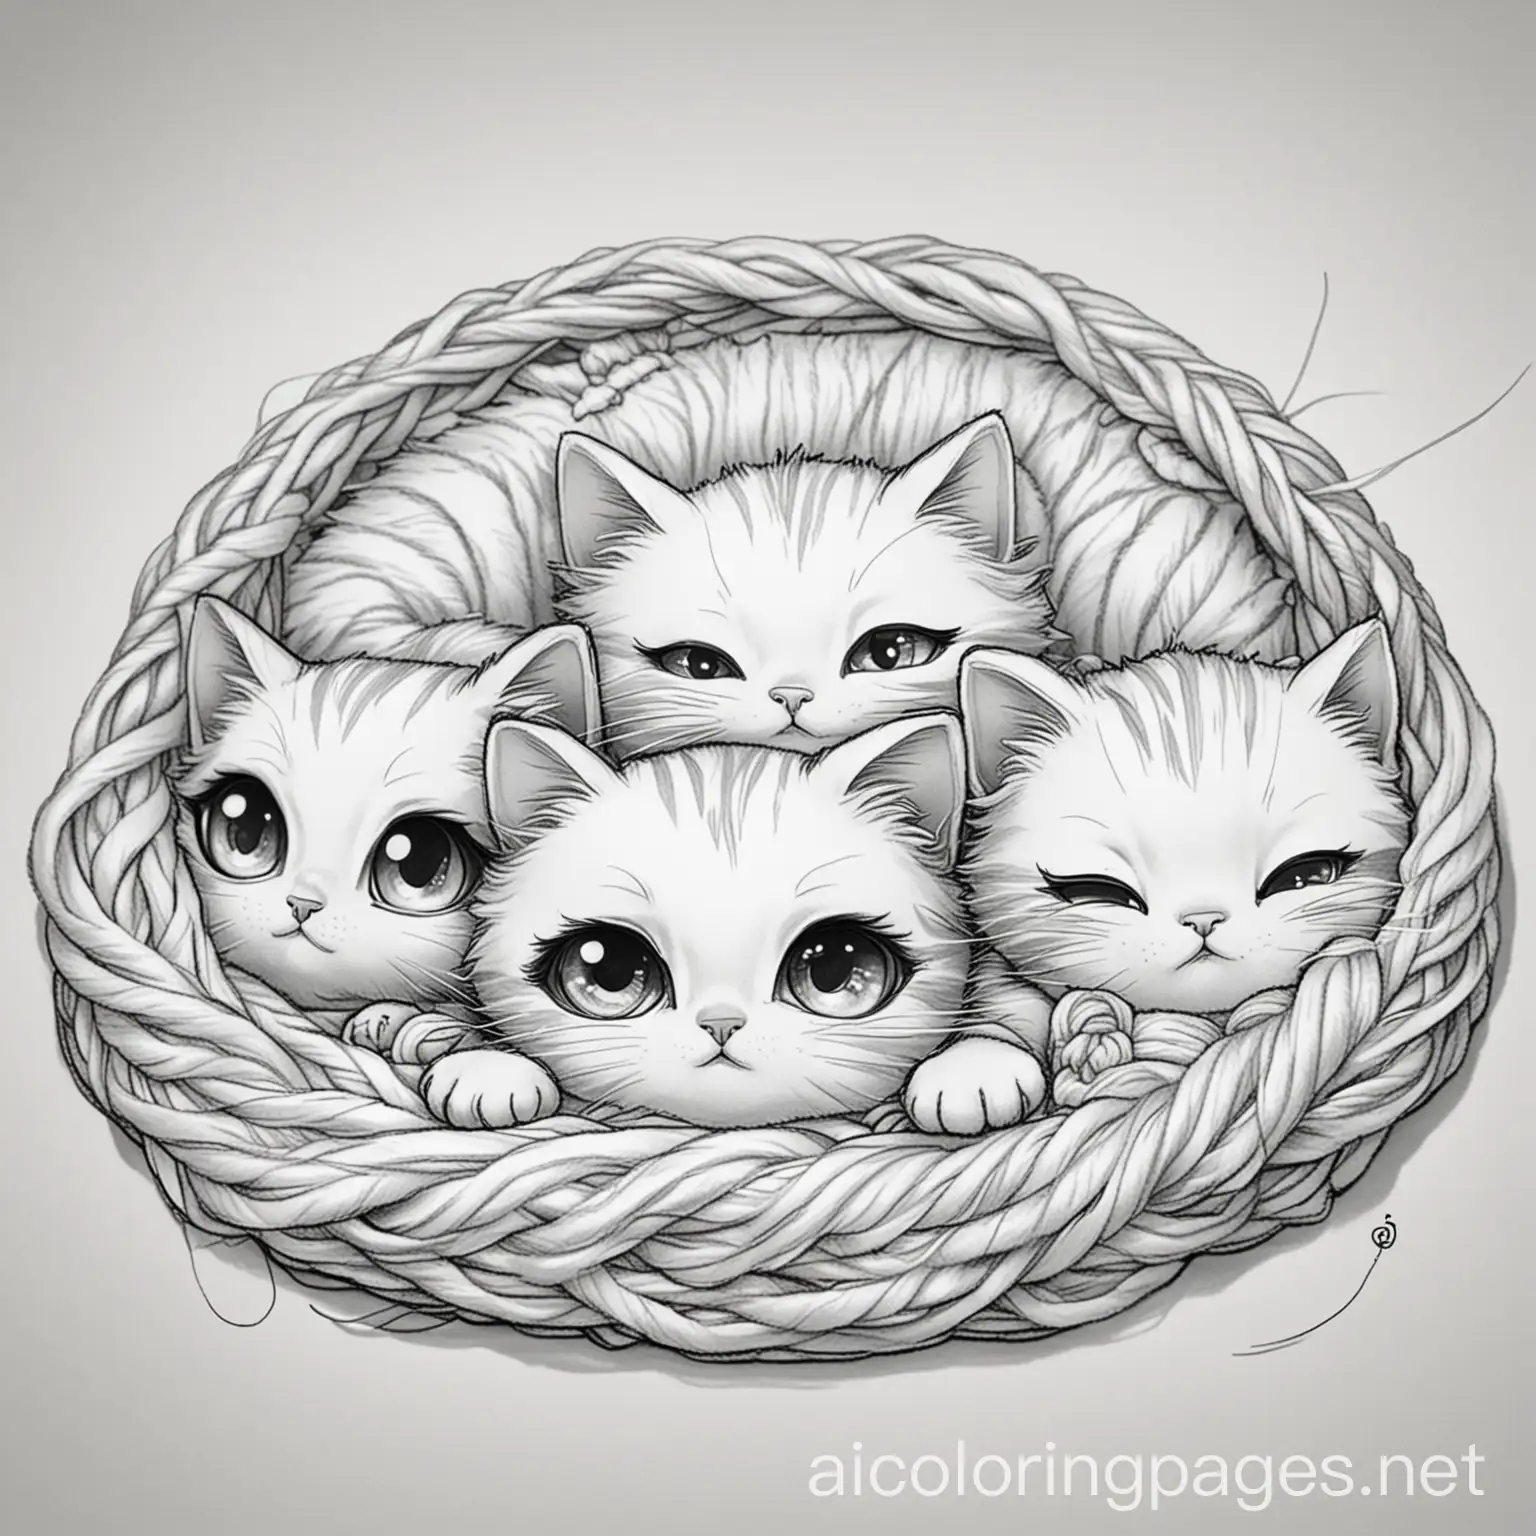 Tiny cats with big eyes, playing with yarn or napping anime style, Coloring Page, black and white, line art, white background, Simplicity, Ample White Space. The background of the coloring page is plain white to make it easy for young children to color within the lines. The outlines of all the subjects are easy to distinguish, making it simple for kids to color without too much difficulty